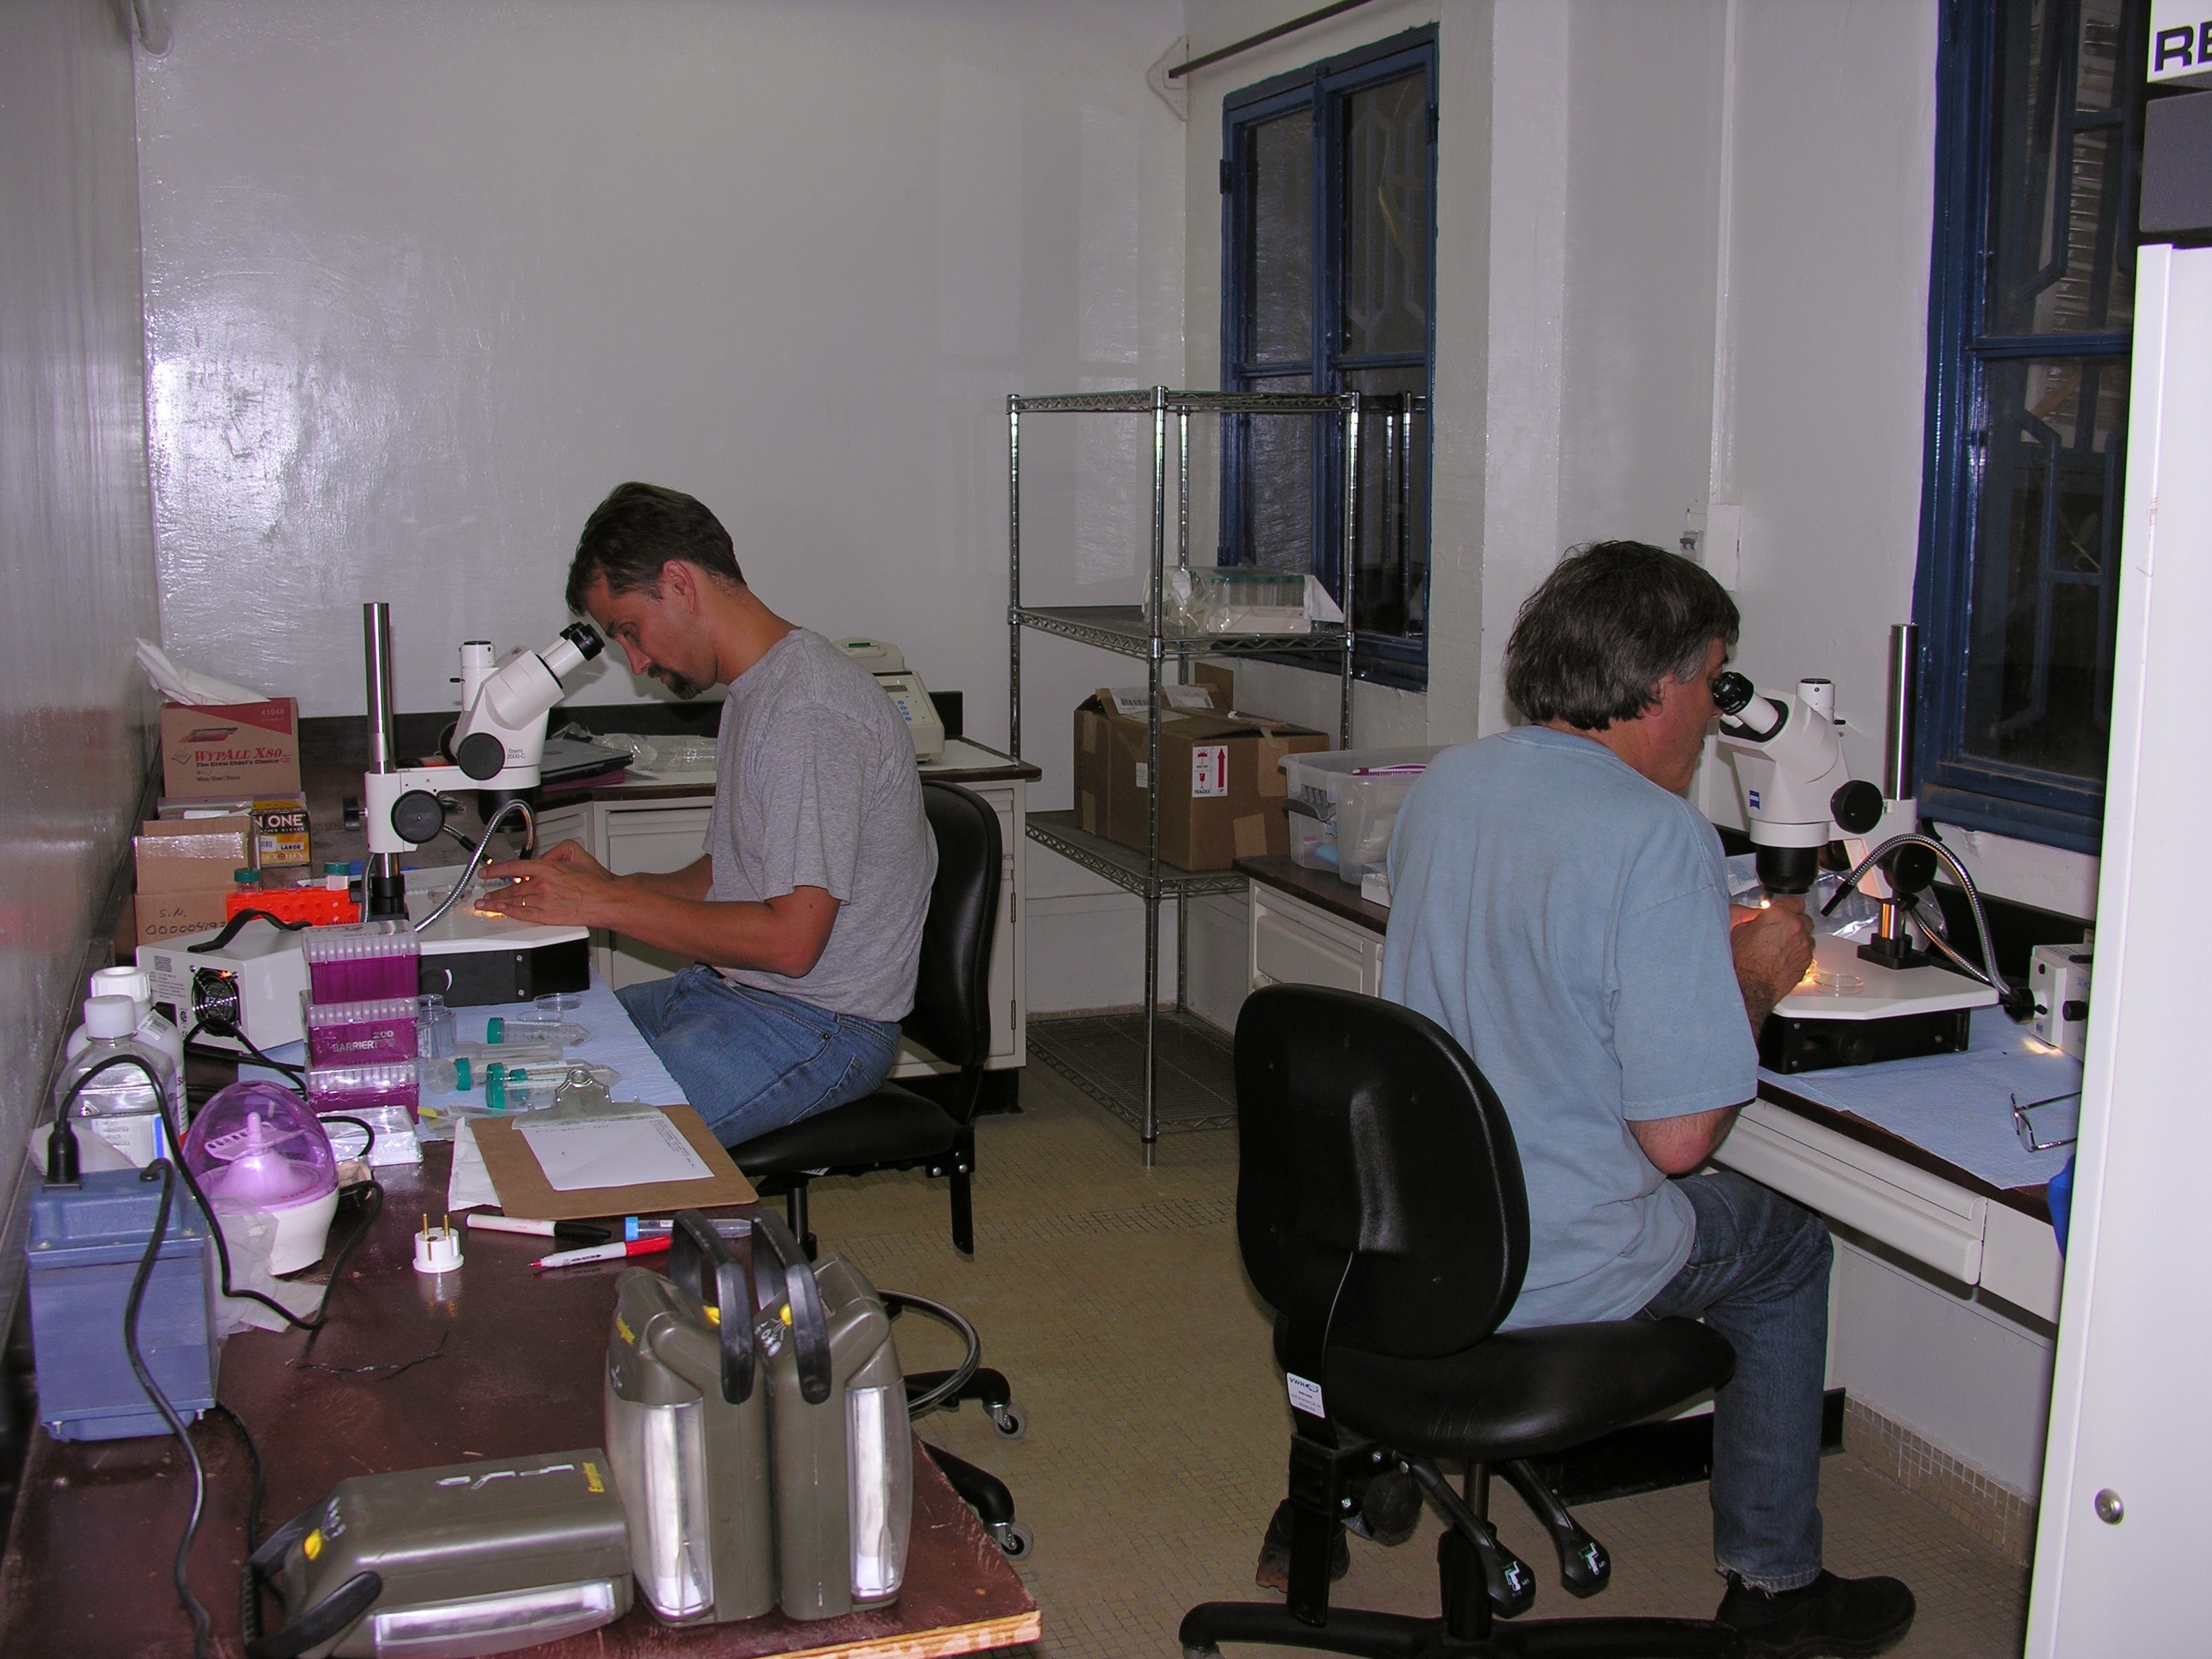 Two men using microscopes in a lab